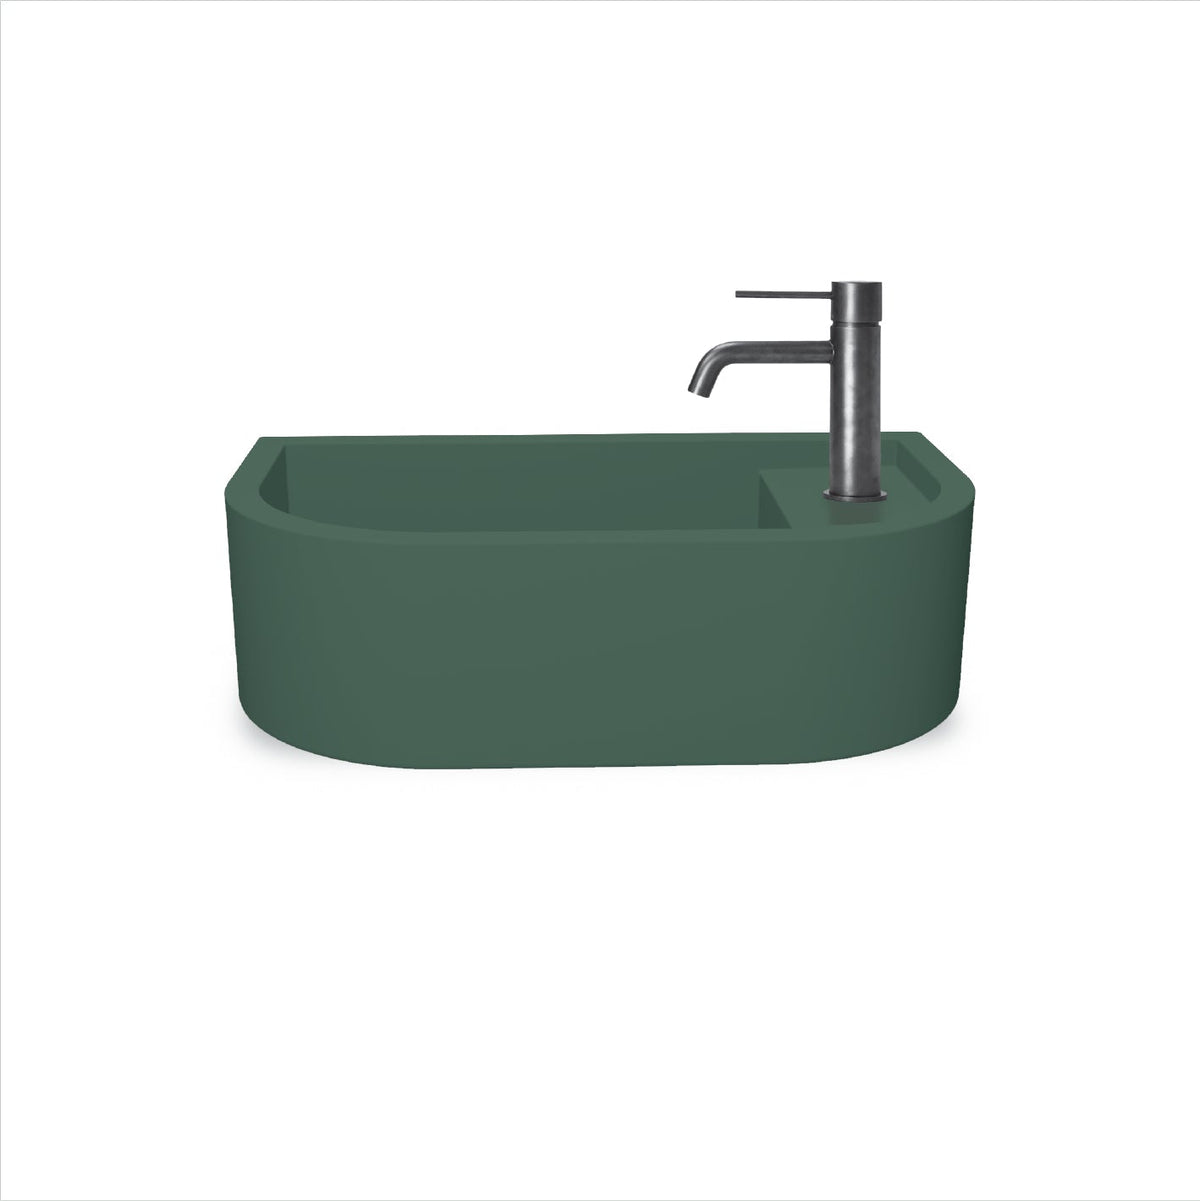 Loop 01 Basin - Overflow - Surface Mount (Teal,Tap Hole,Chrome)